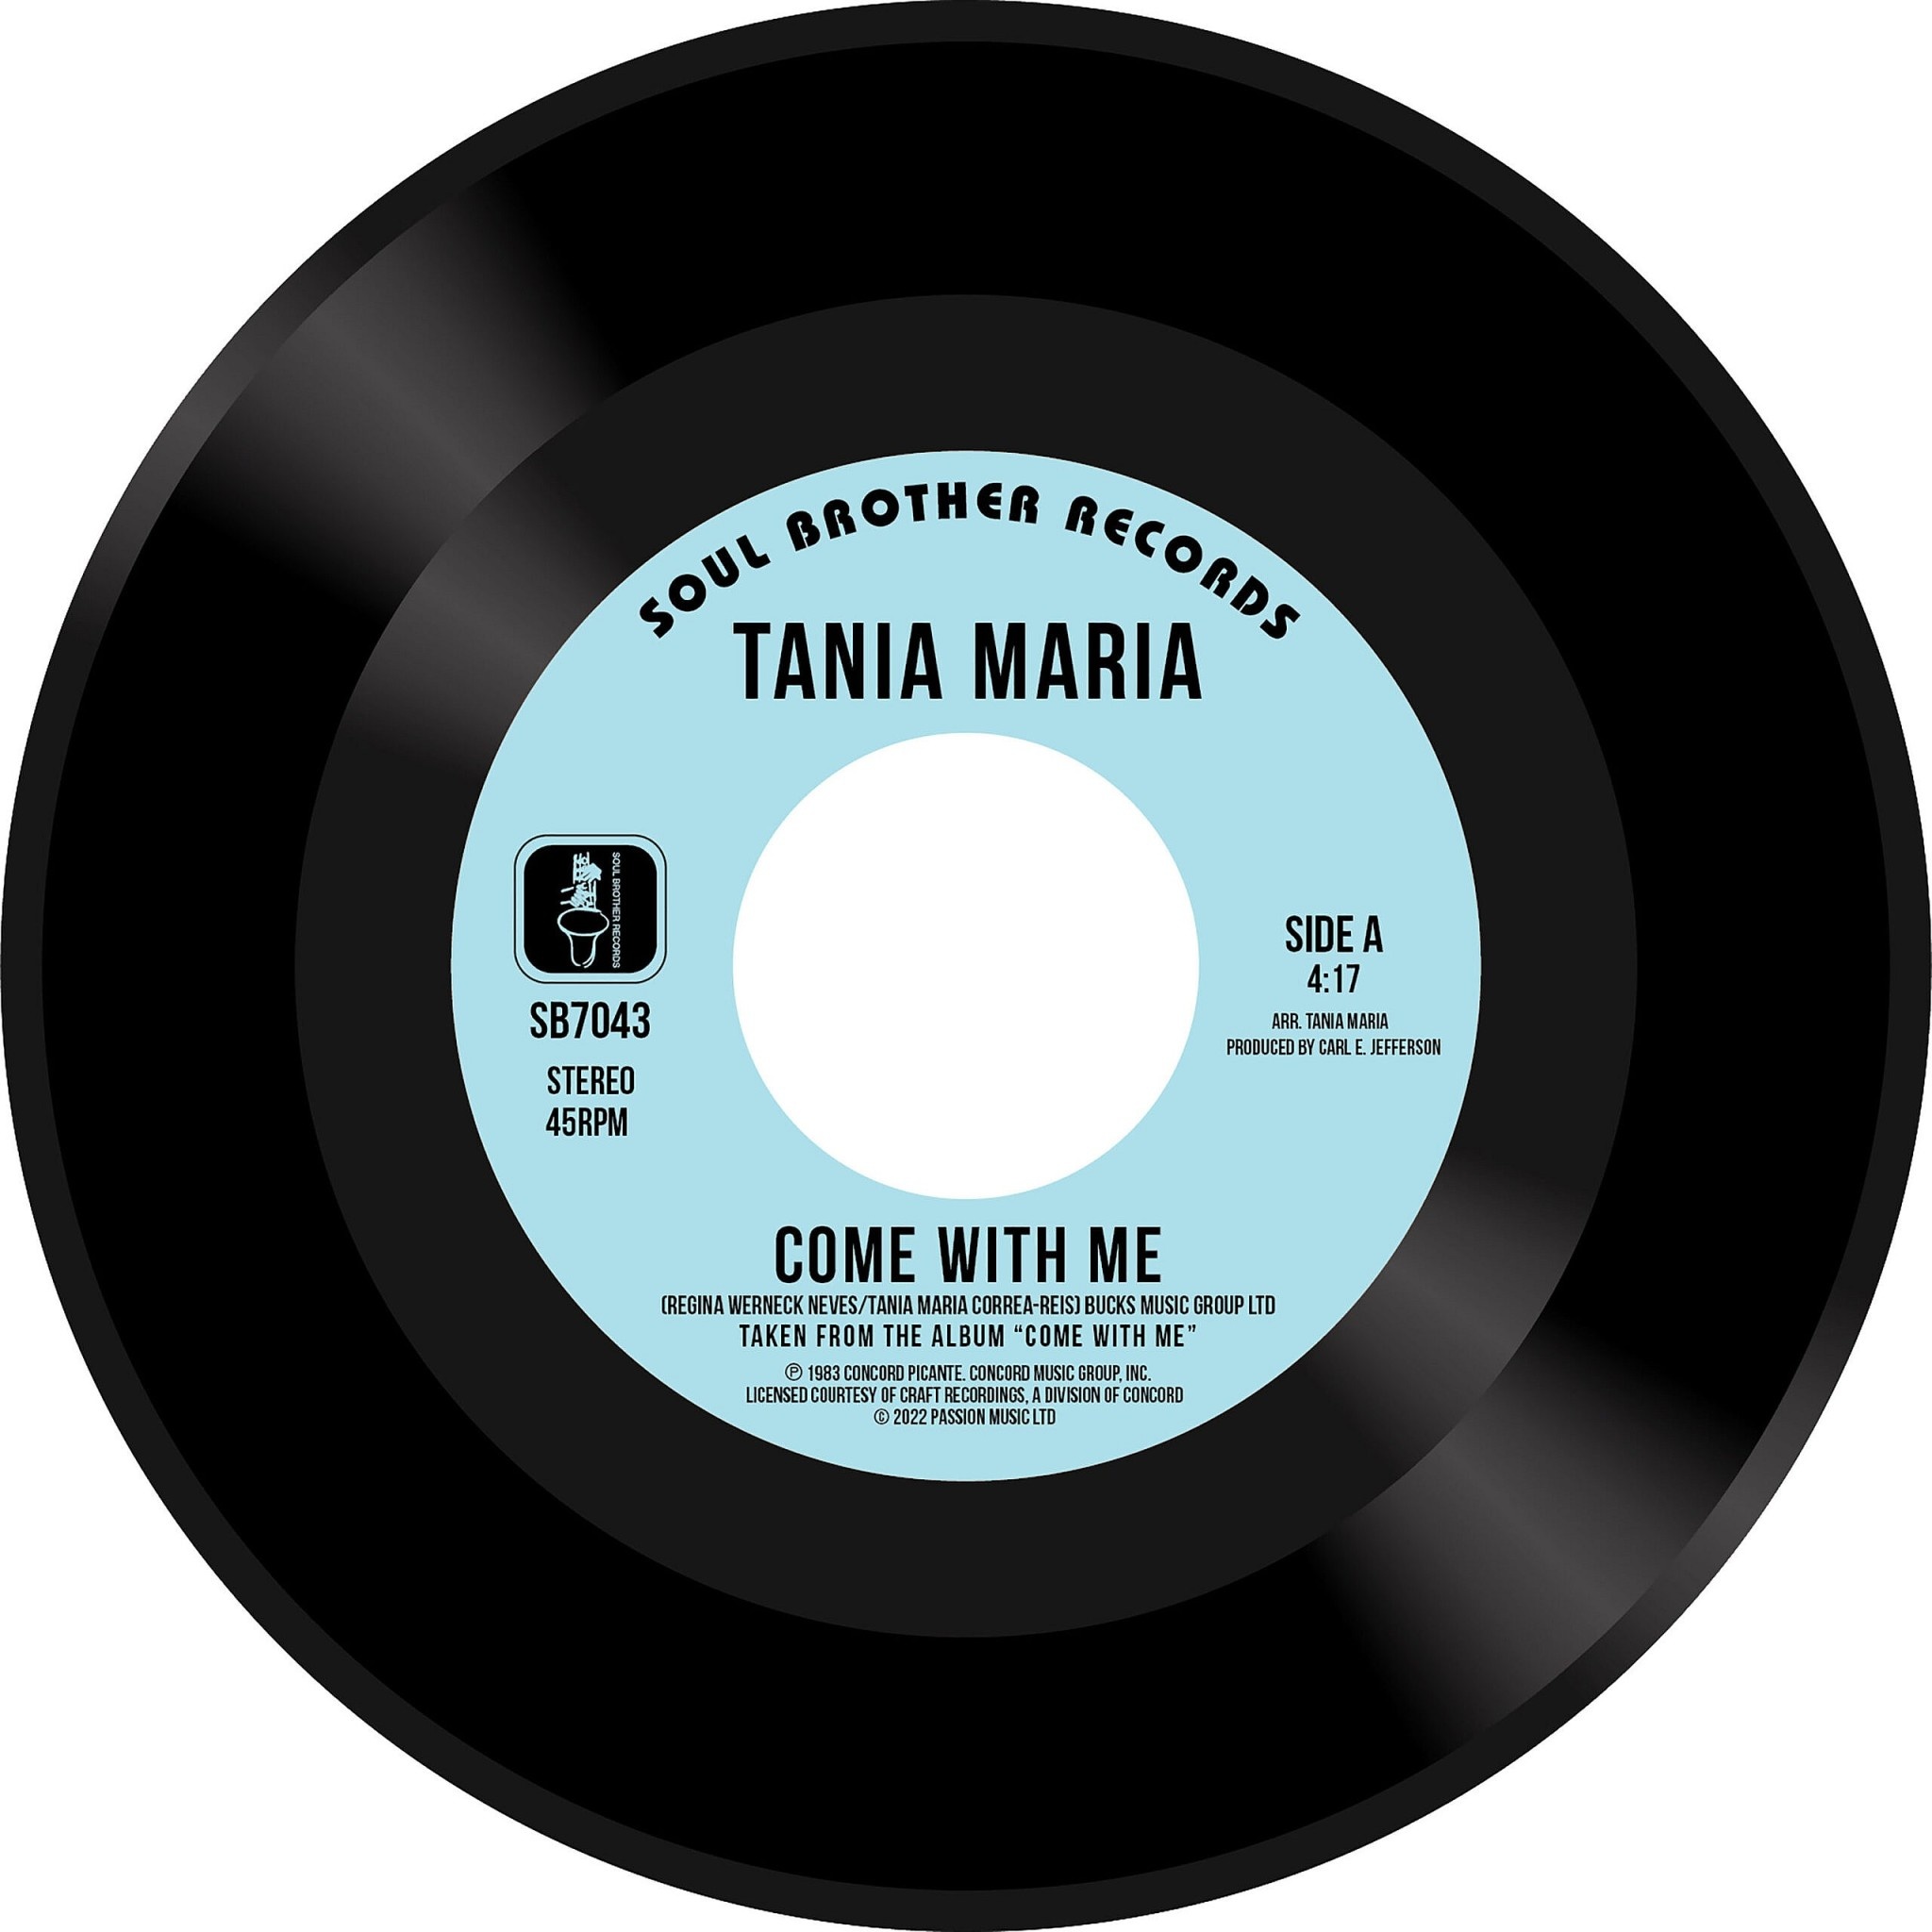 Soul Brother Records Tania Maria - Come With Me